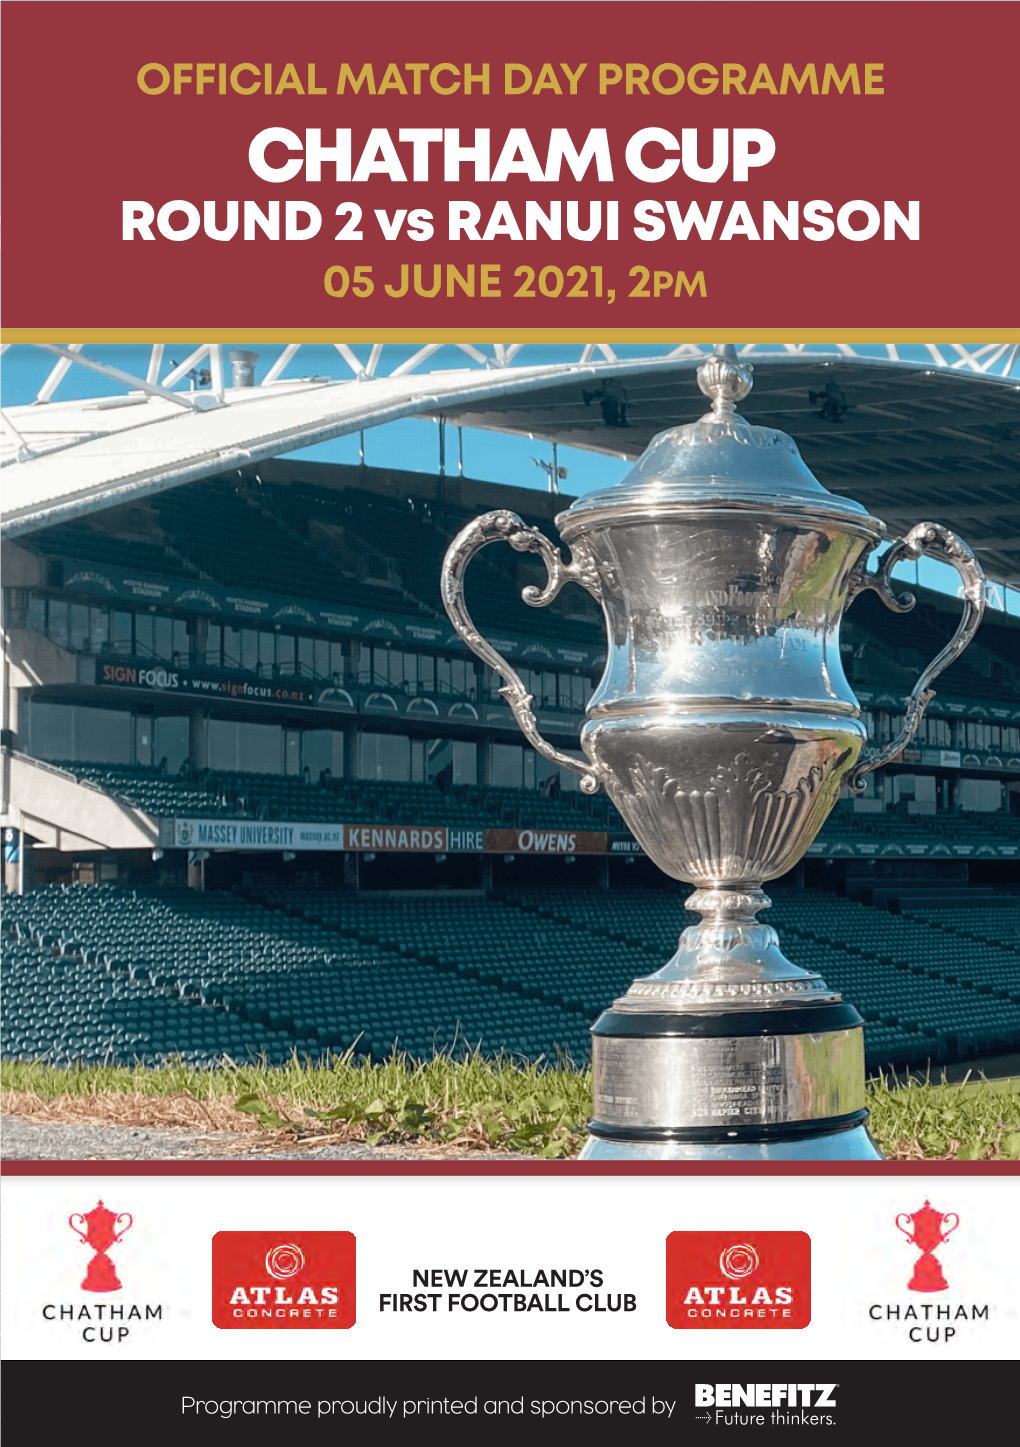 CHATHAM CUP ROUND 2 Vs RANUI SWANSON 05 JUNE 2021, 2PM